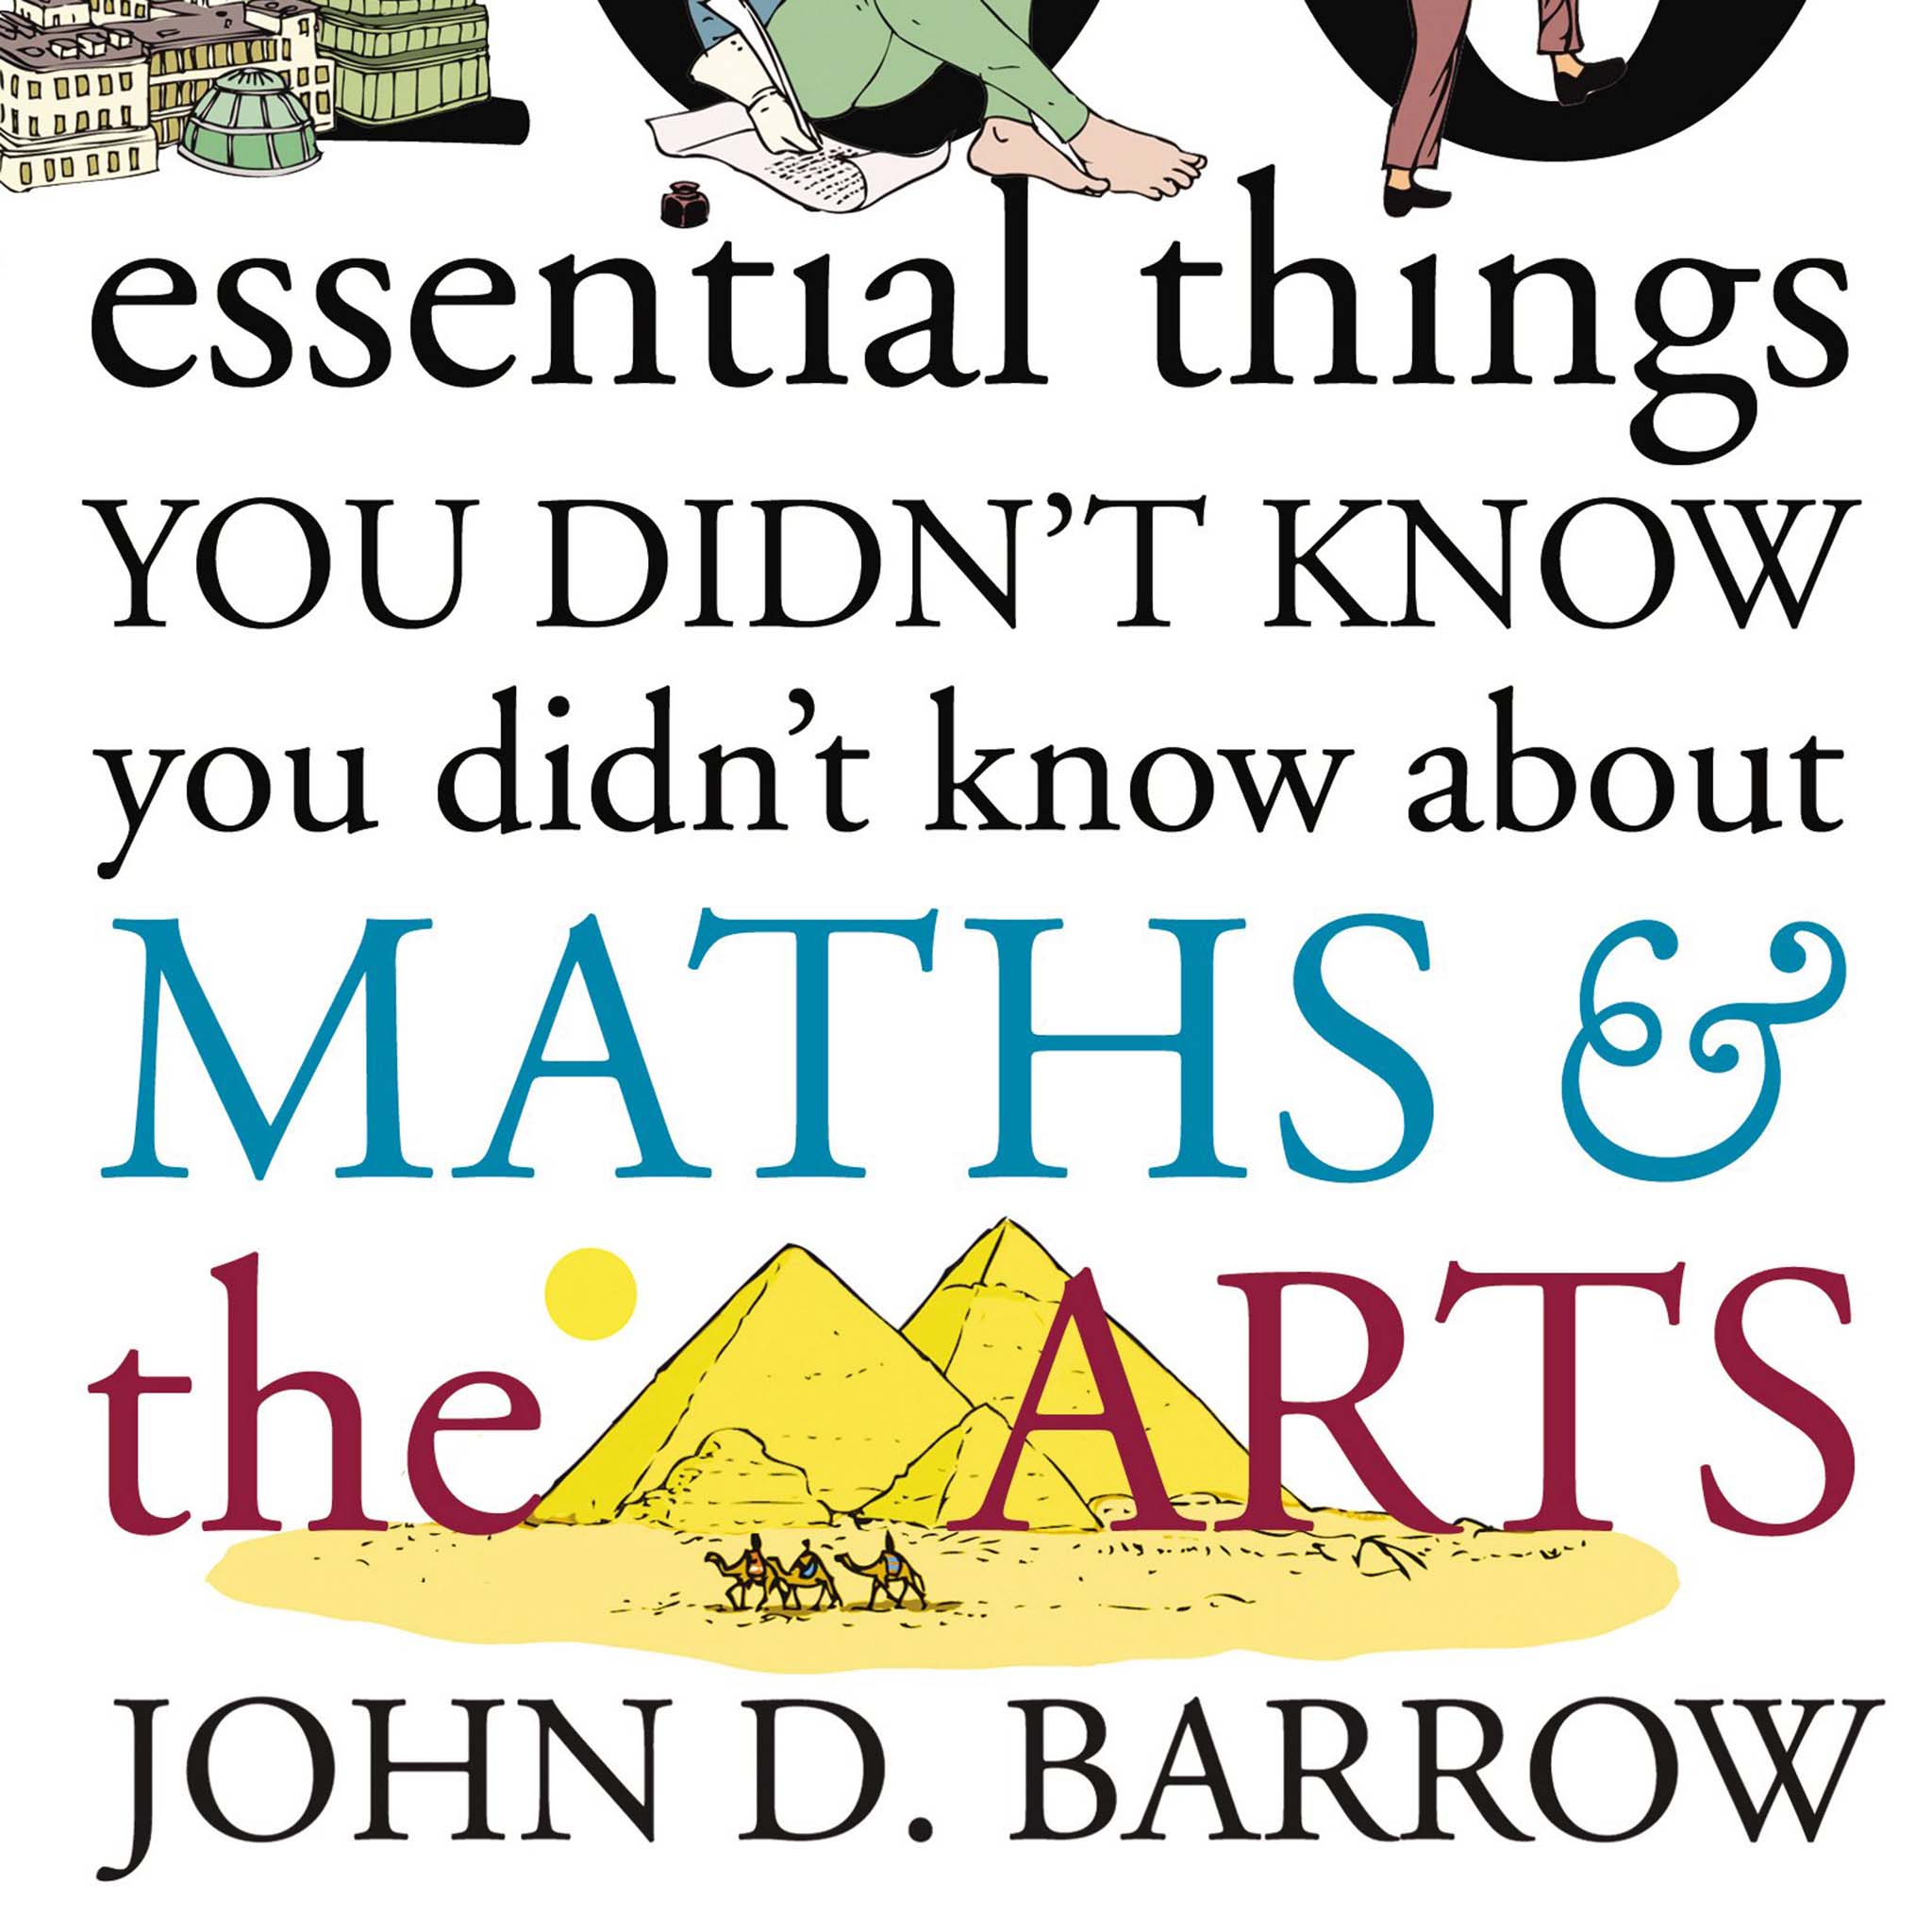 100 essential things you didn’t know you didn’t know about maths and the arts by John D Barrow